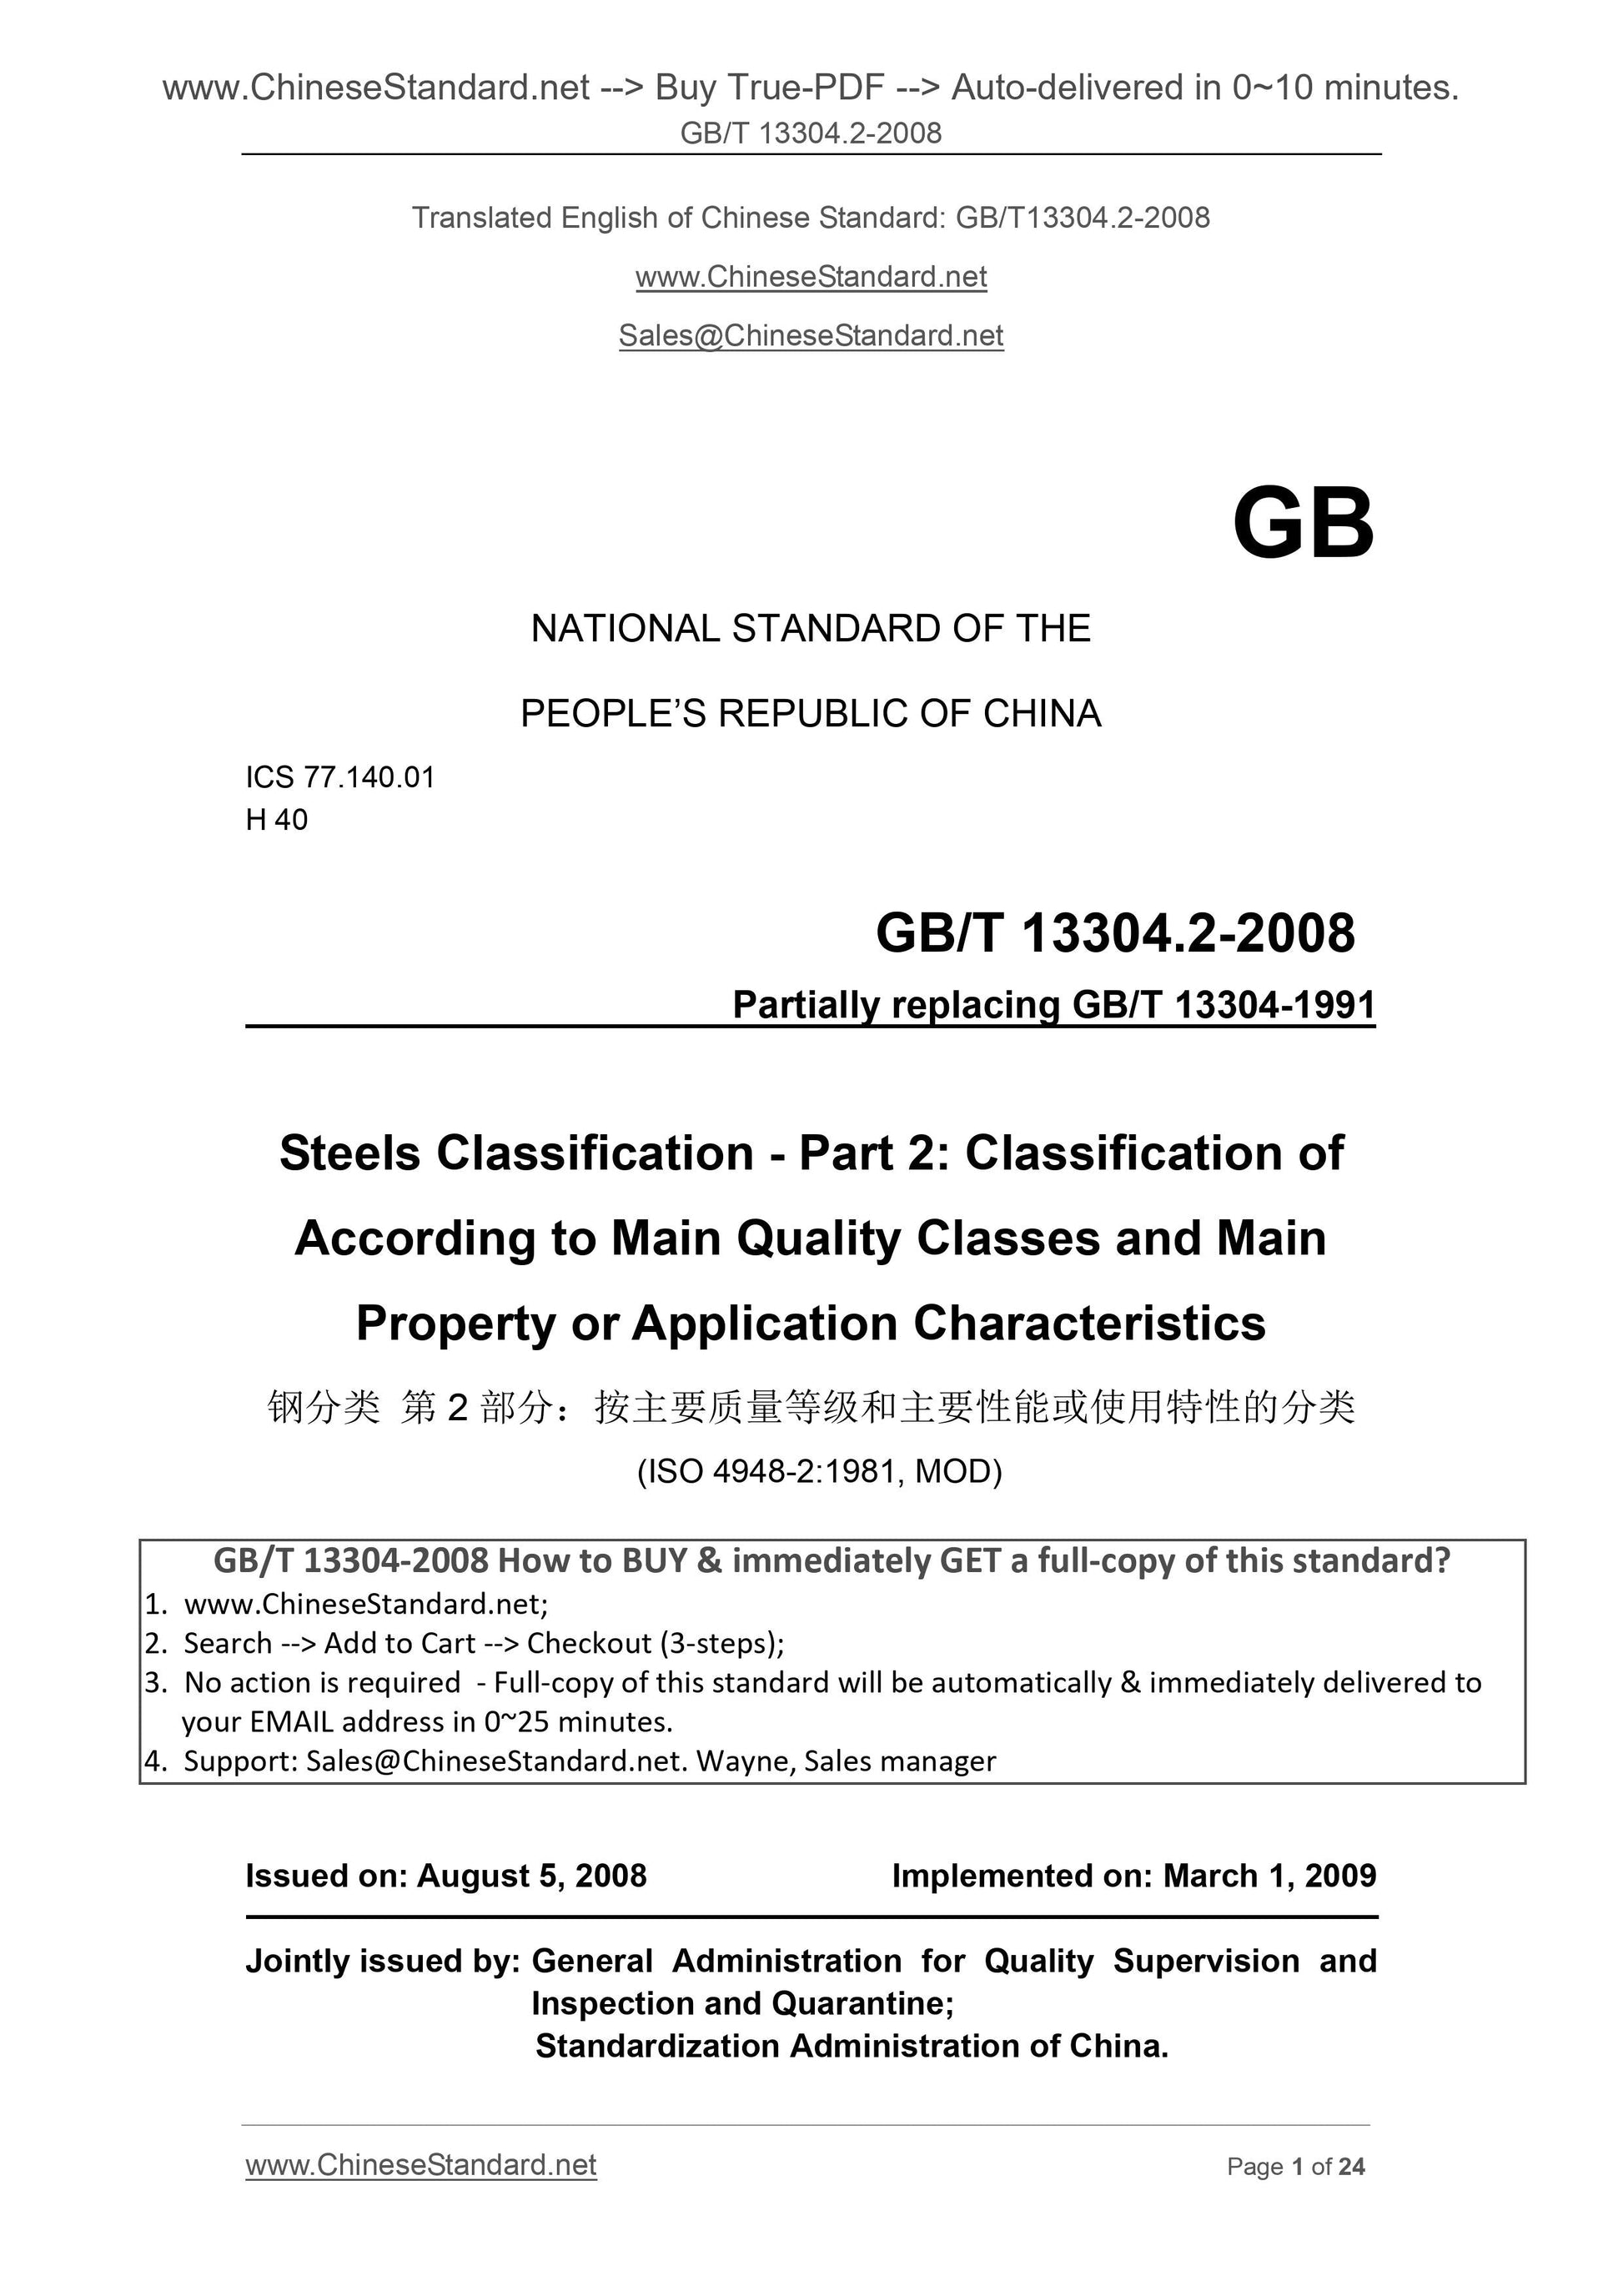 GB/T 13304.2-2008 Page 1